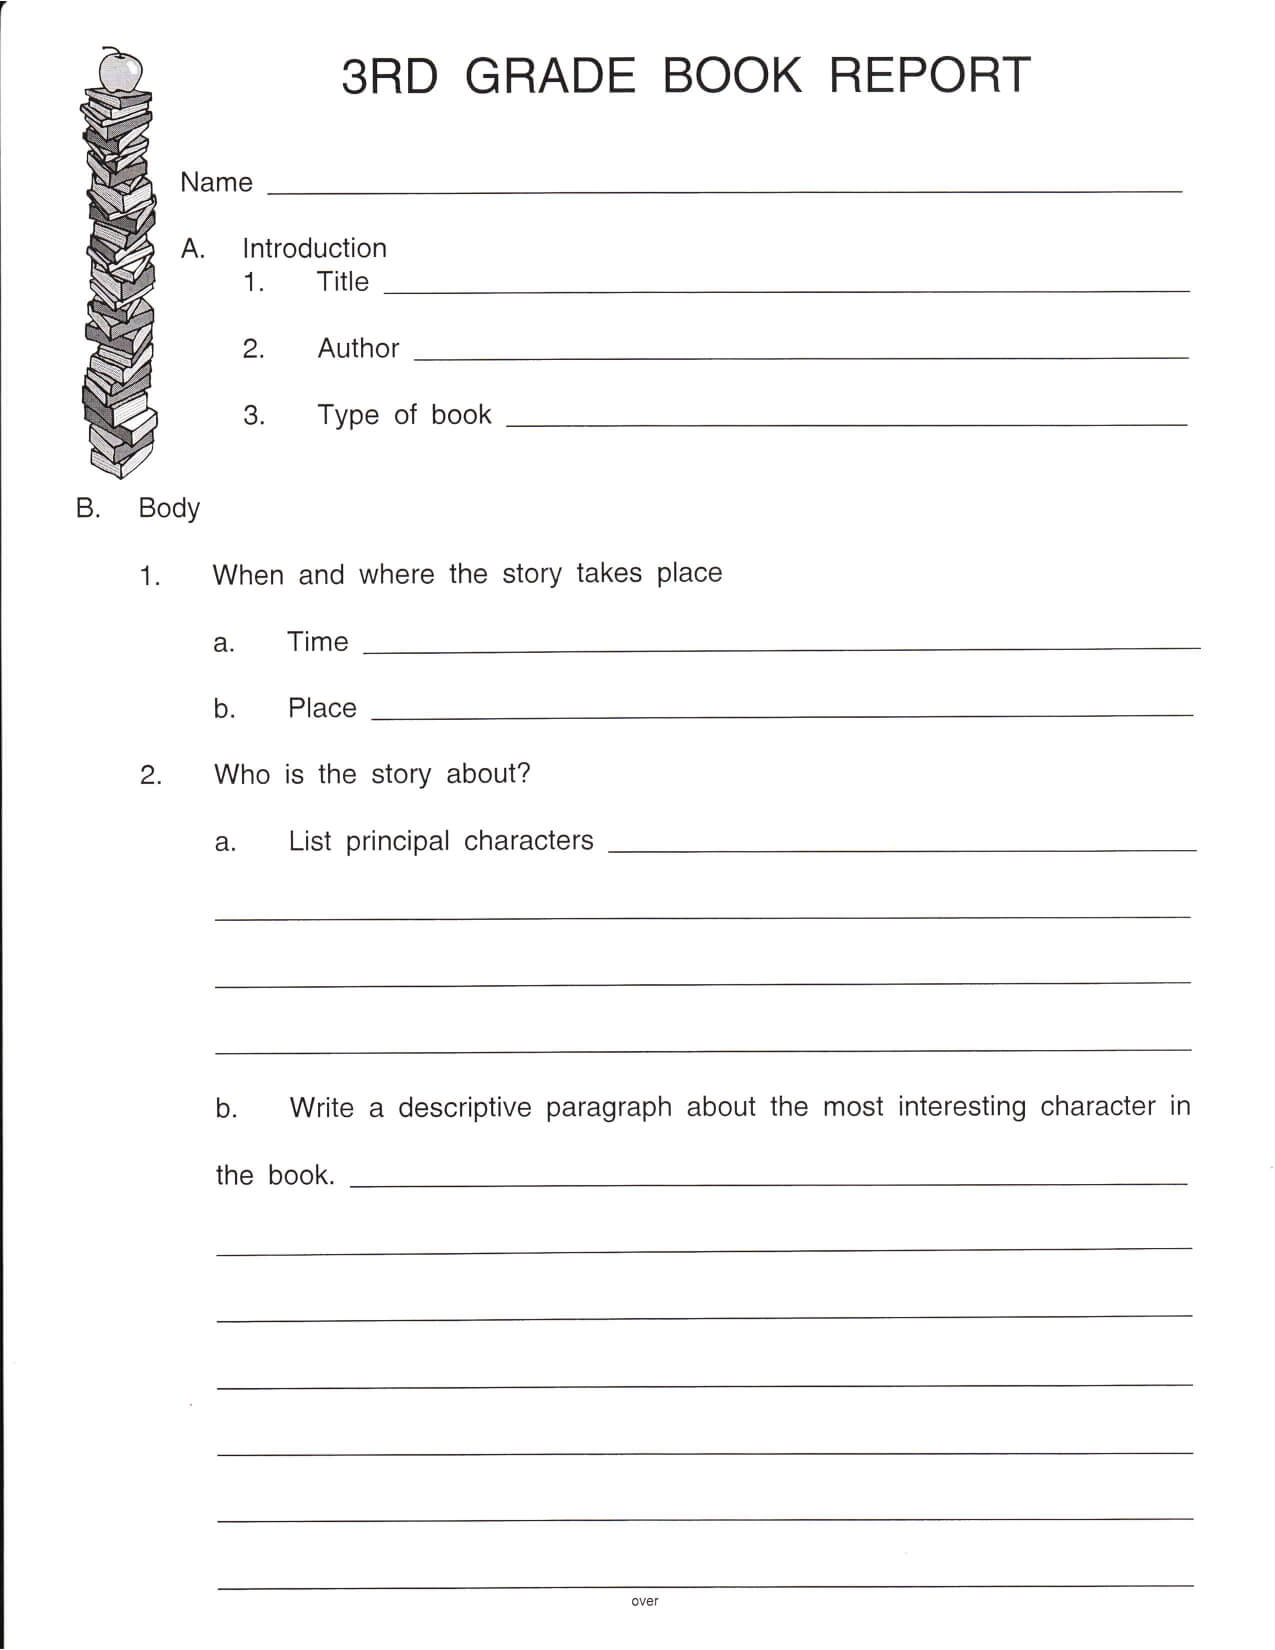 Book Report Examples 1St Grade College Level 5Th Pdf 2Nd 3Rd With Book Report Template Grade 1